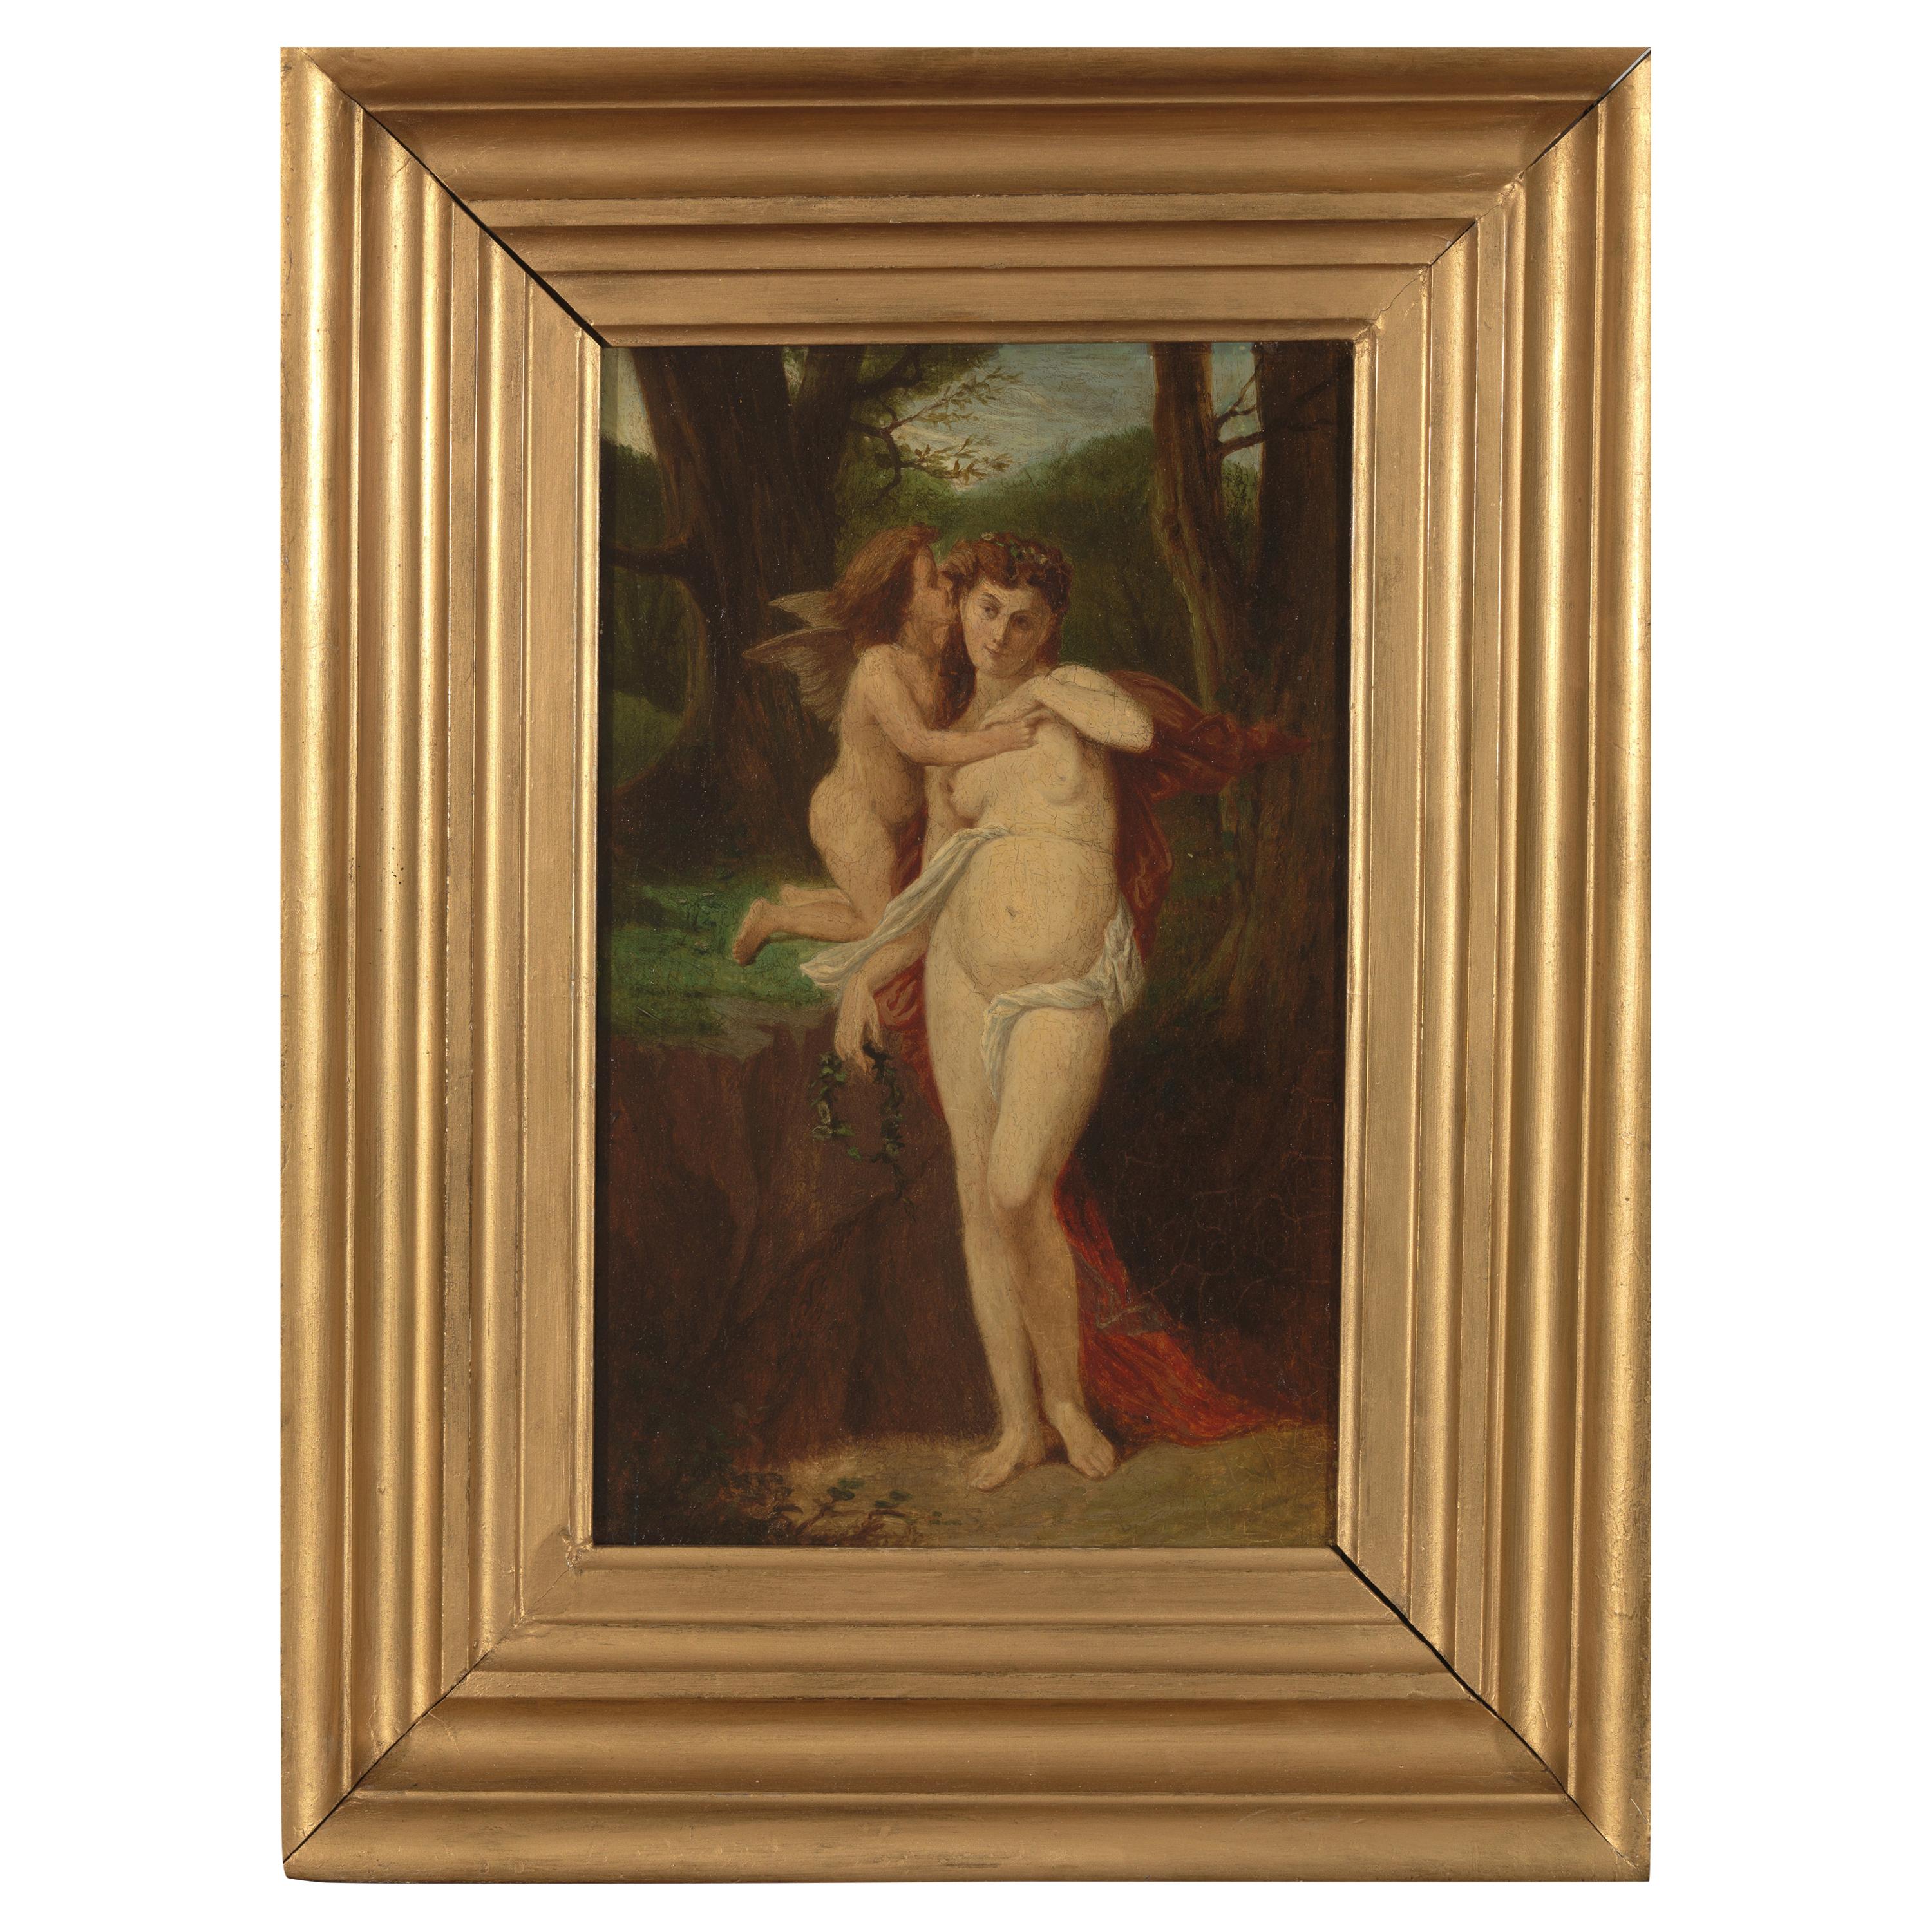 19th Century French Shool, Cupid & Psyche, Oil on Panel, Framed